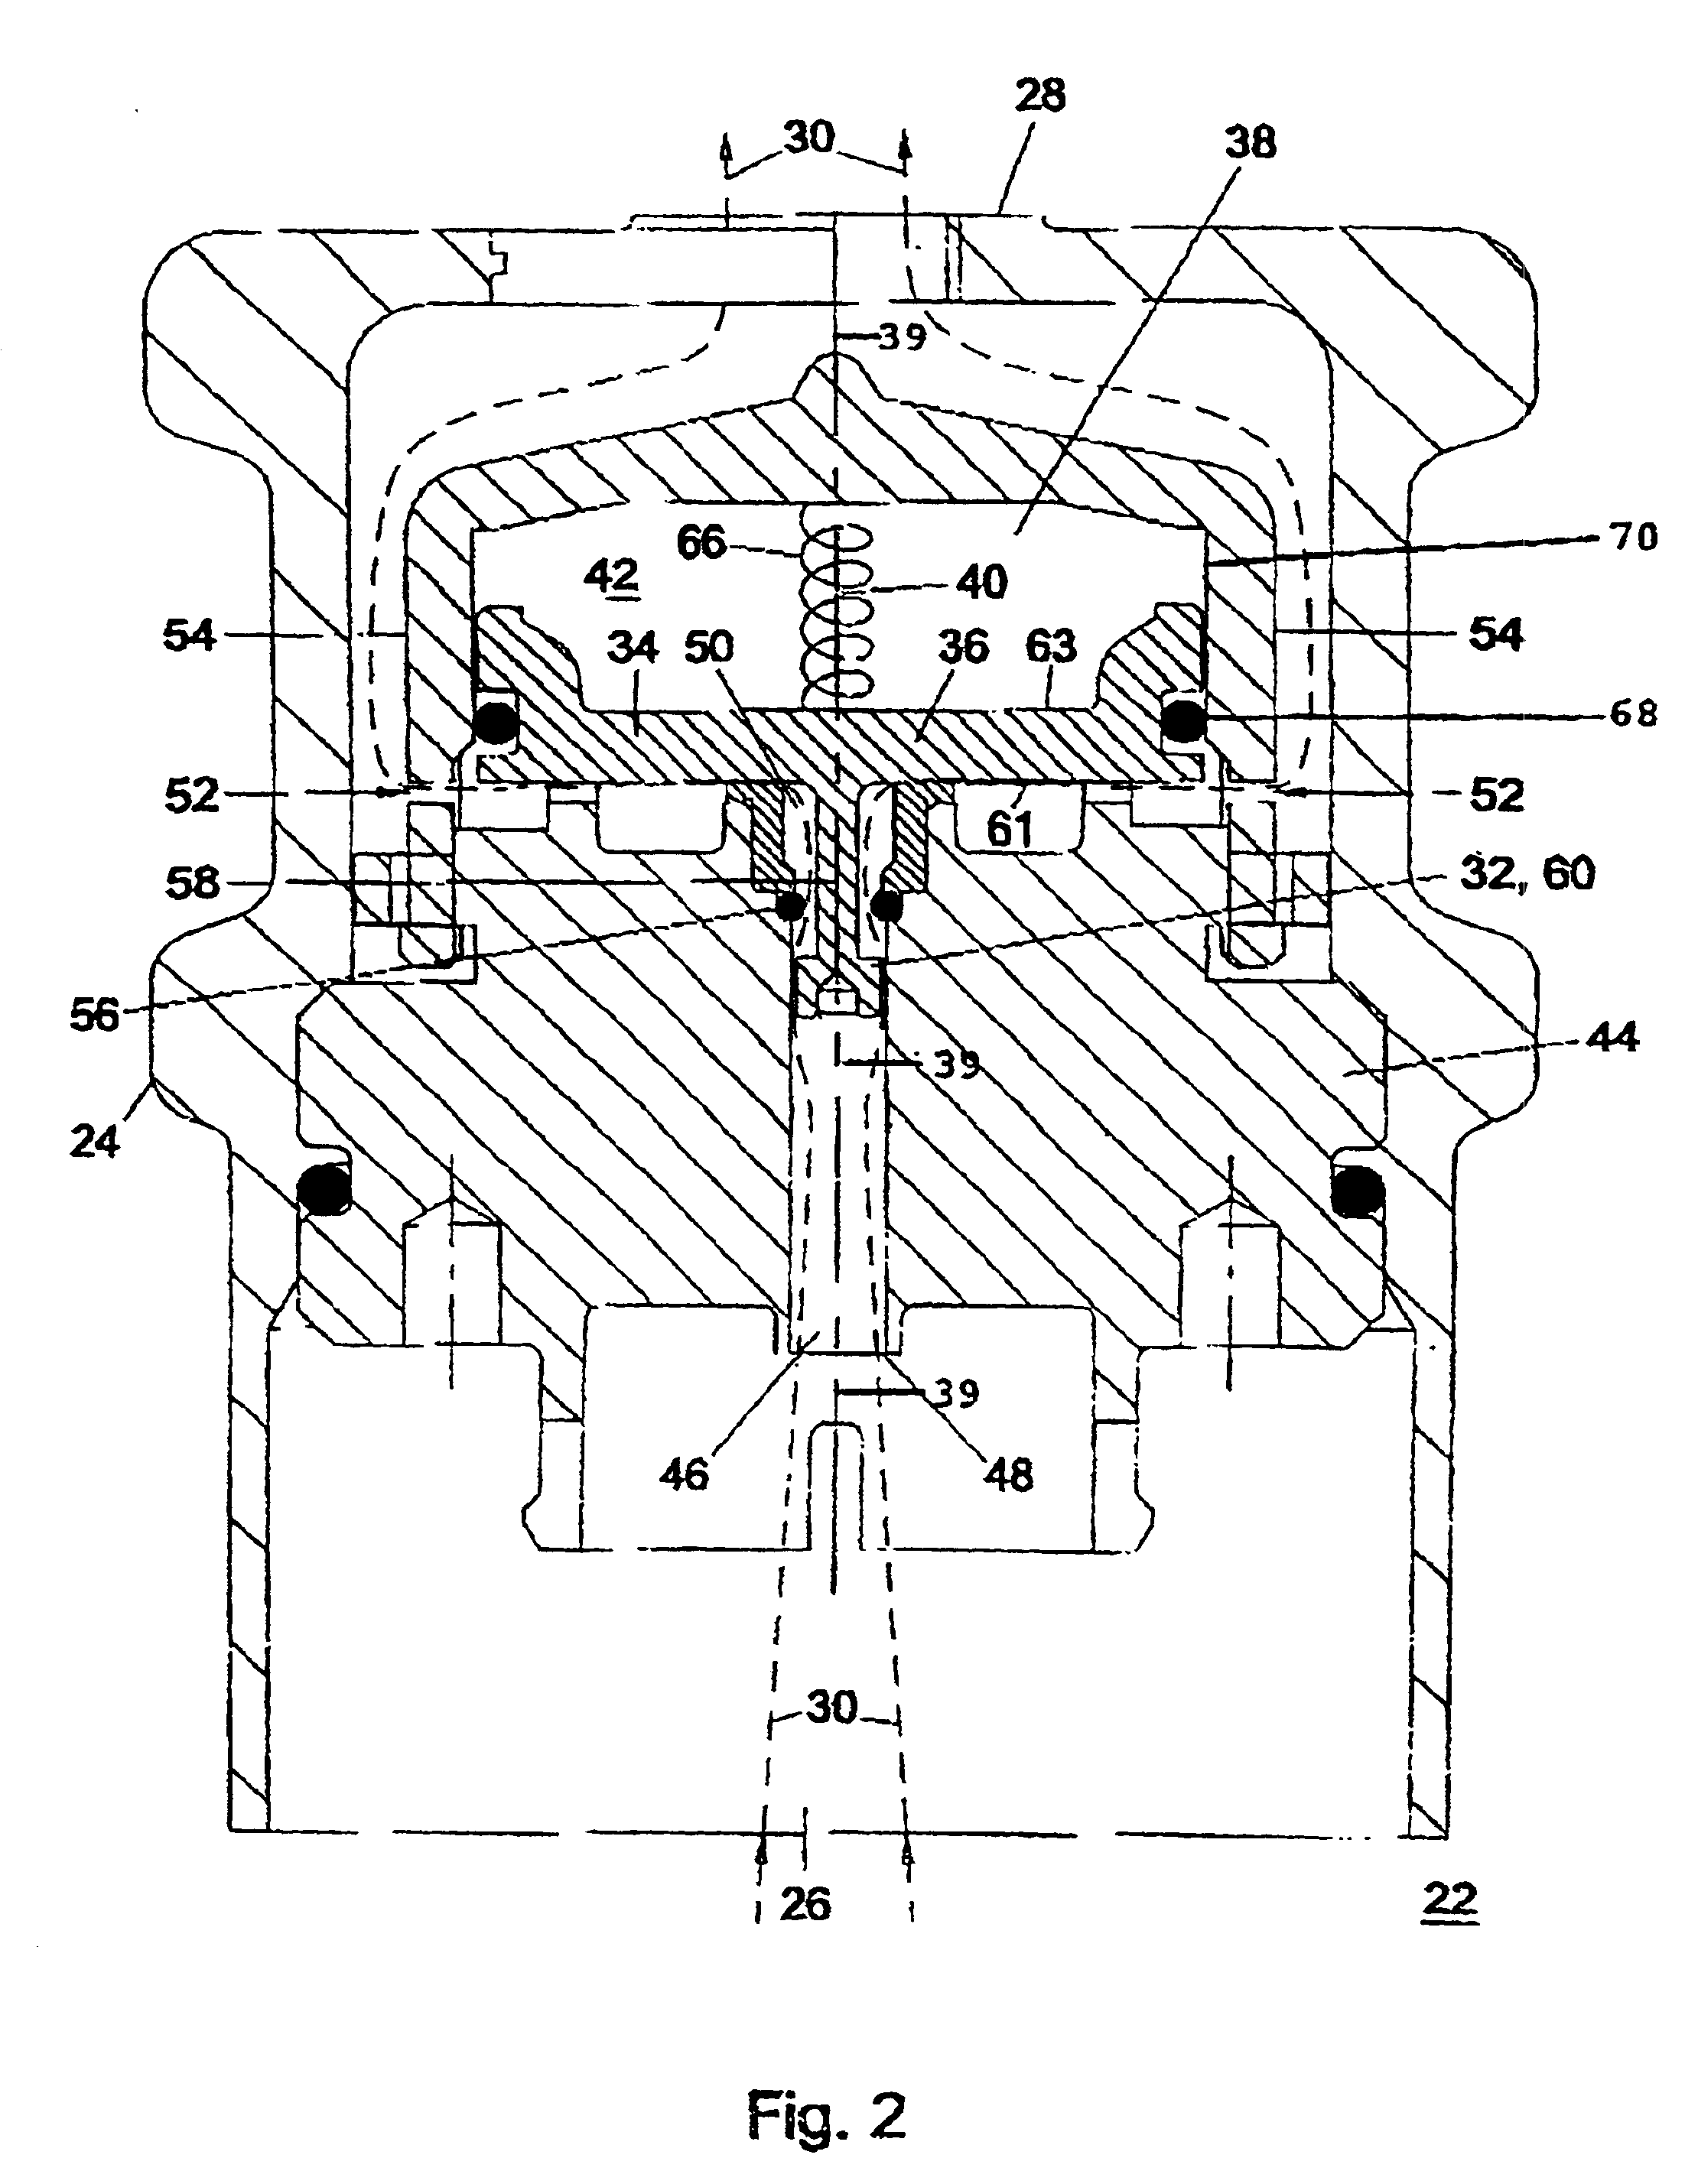 Pressurized package comprising a pressure control device